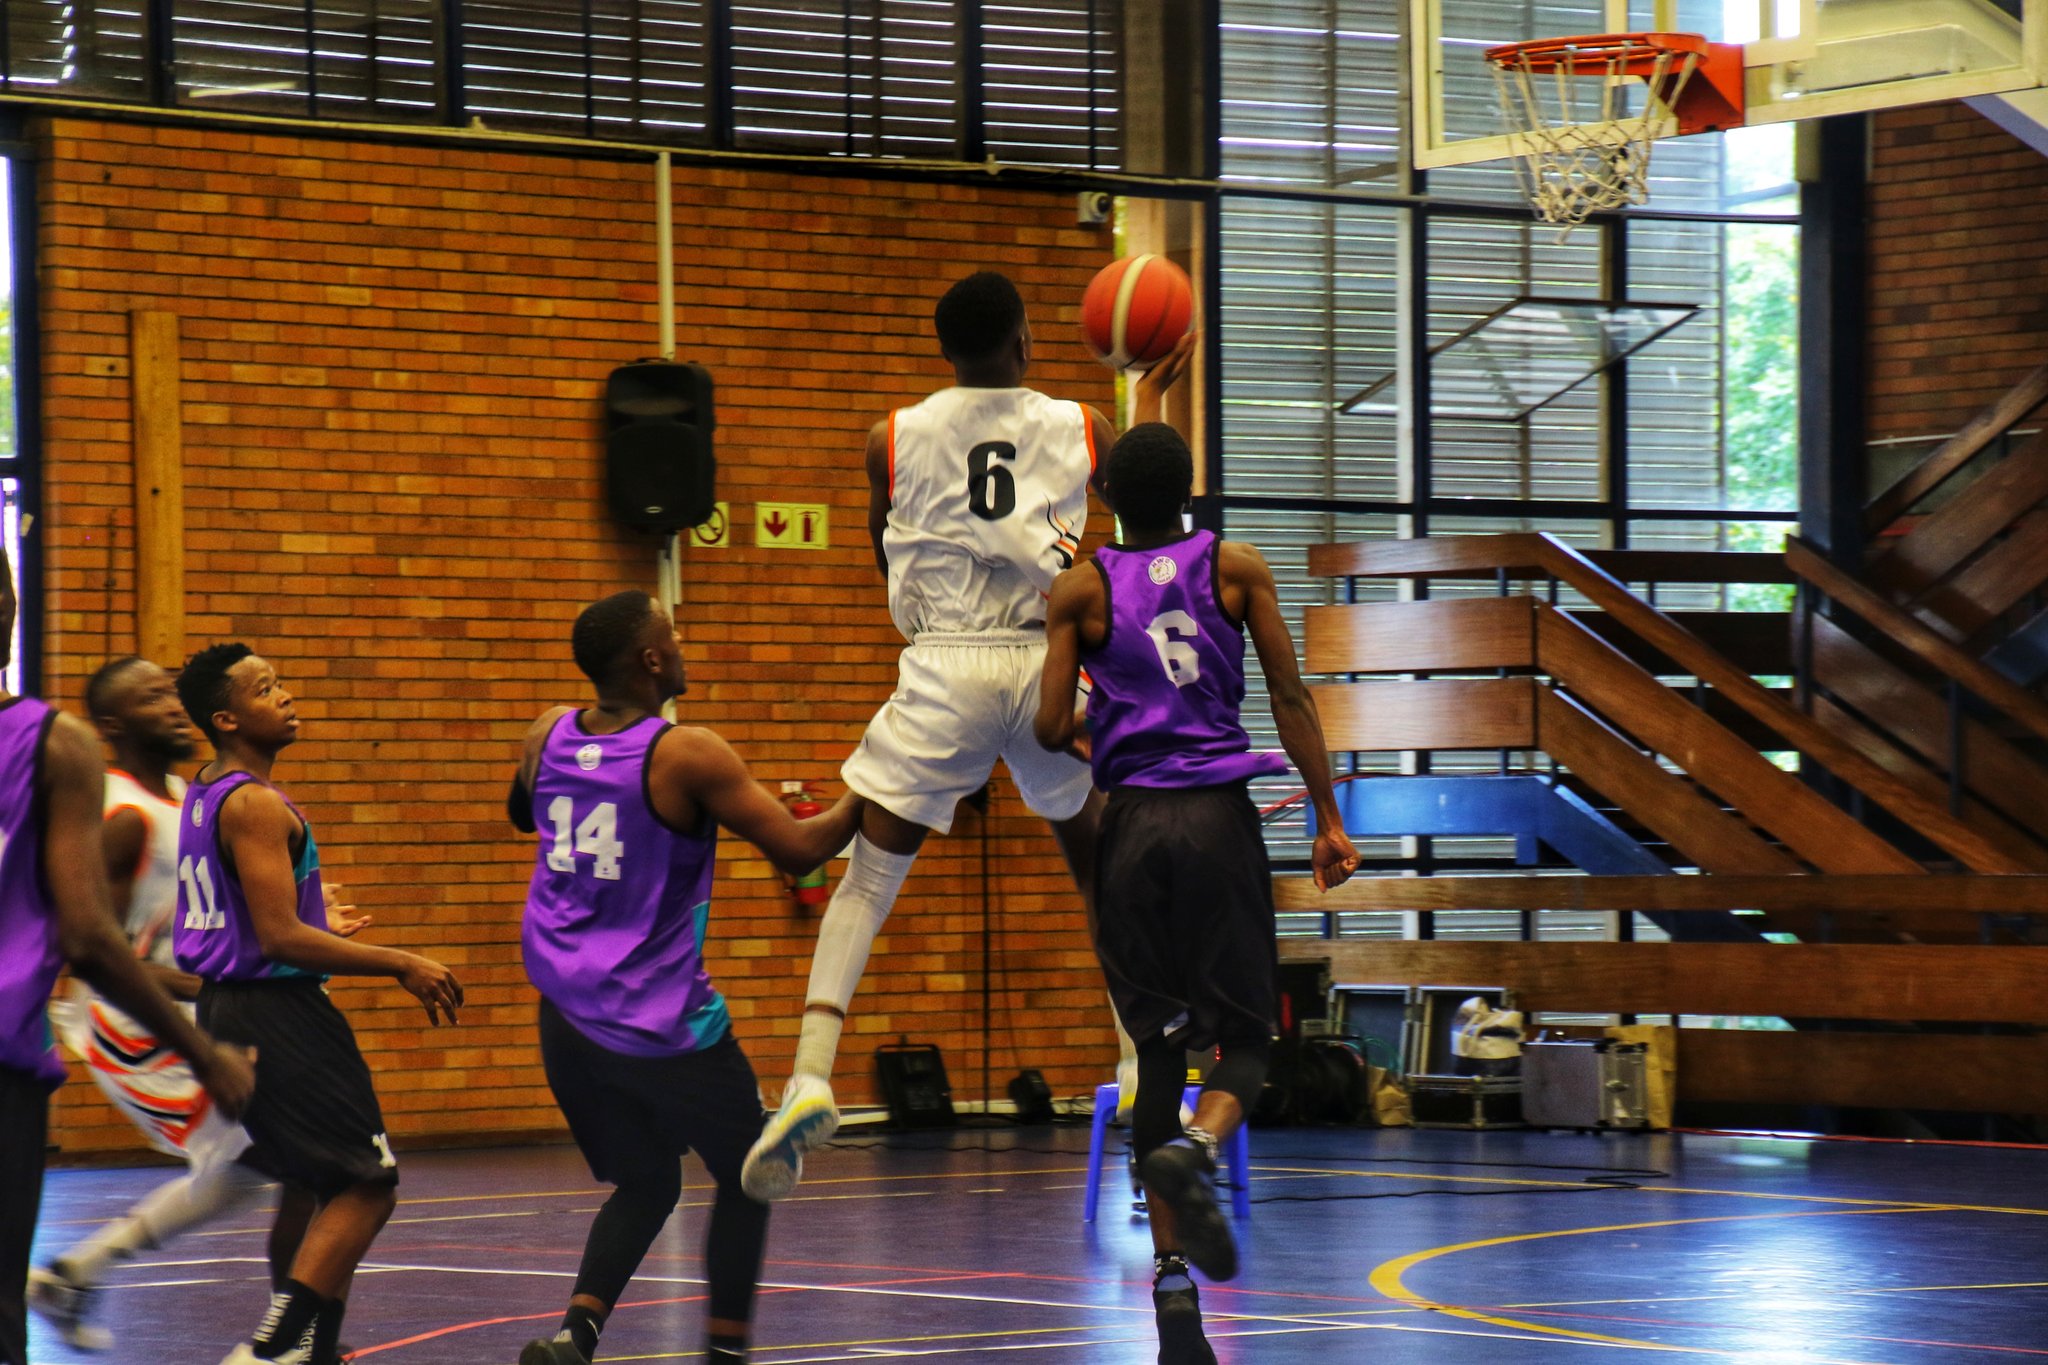 UJ's Gloire Kabenge slots in a 2-point goal against North West University in the 2022 USSA 5x5 Basketball championship at Wits Old Mutual Hall in Johannesburg